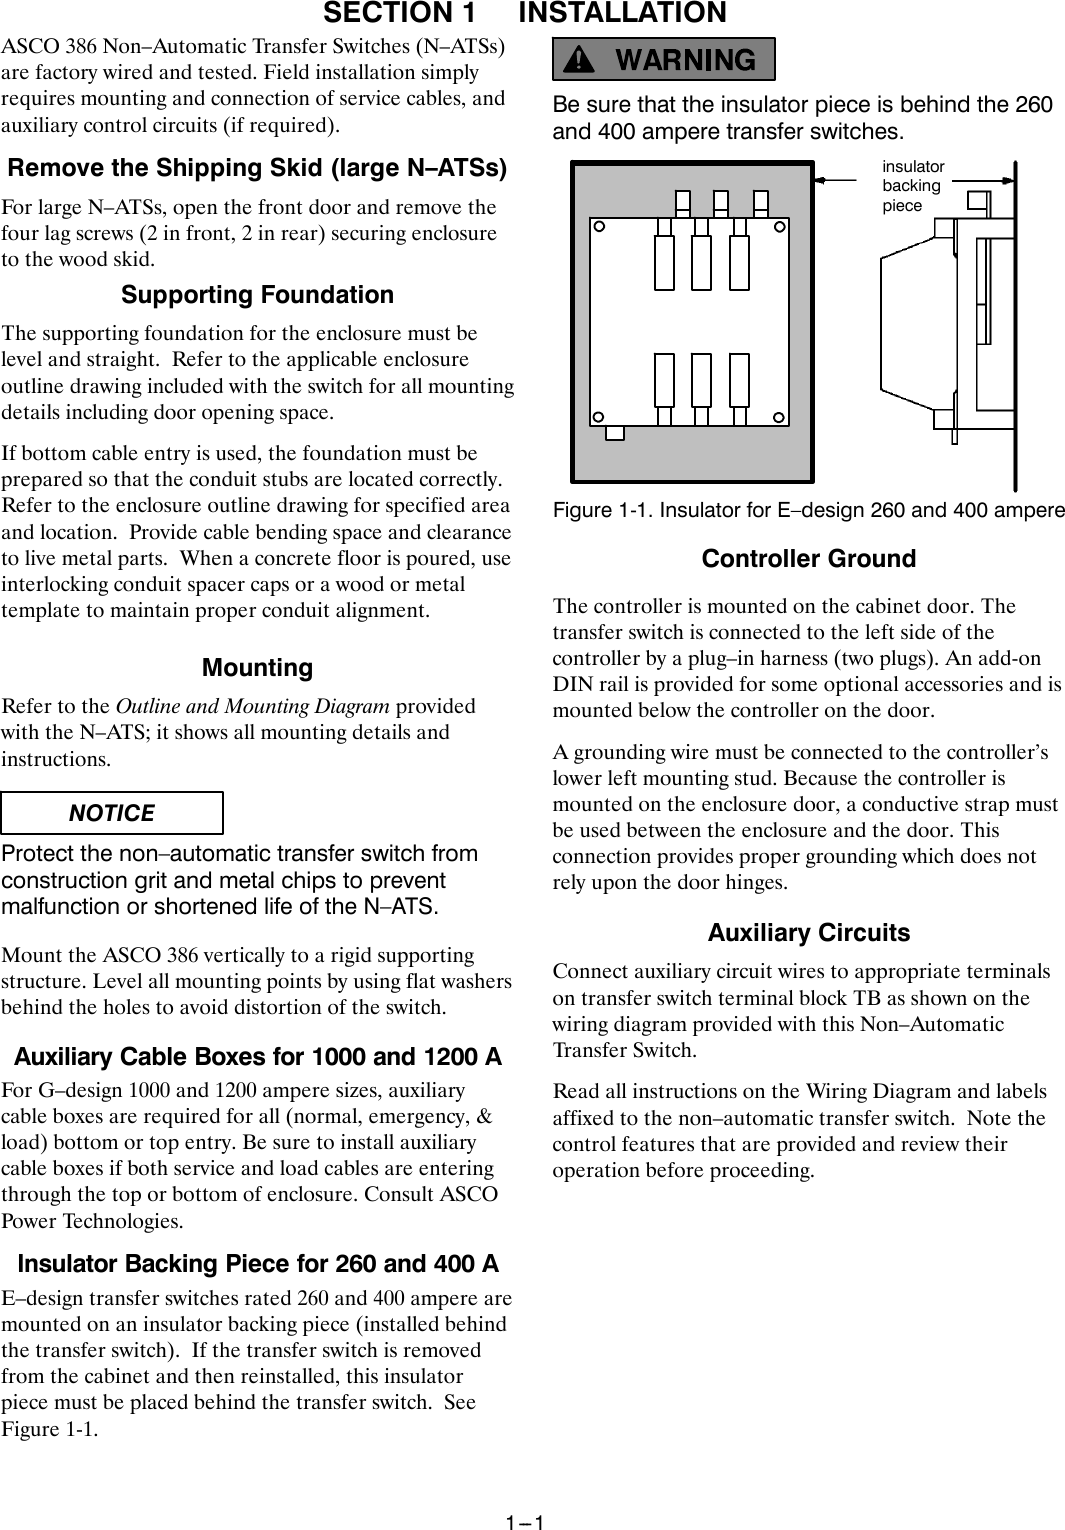 Page 3 of 12 - Emerson Emerson-Series-386-E-Design-Users-Manual- Operator's Manual For Series 386 N-ATS E 260-400 A, G 1000-3000 A UL/CSA  Emerson-series-386-e-design-users-manual